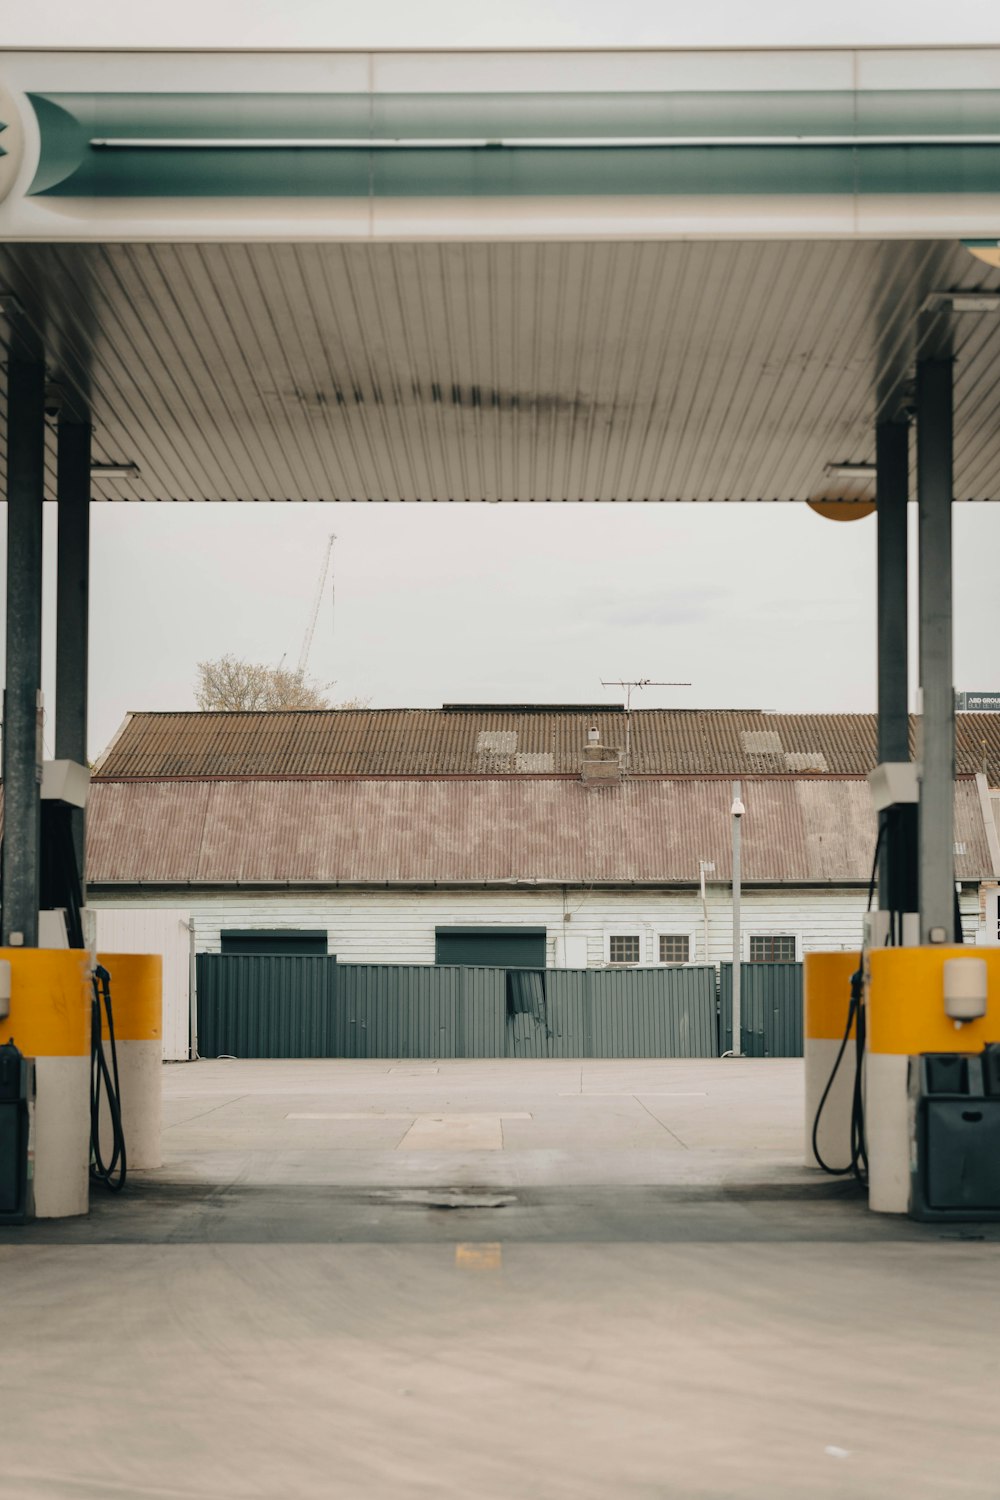 a gas station with yellow and white gas pumps